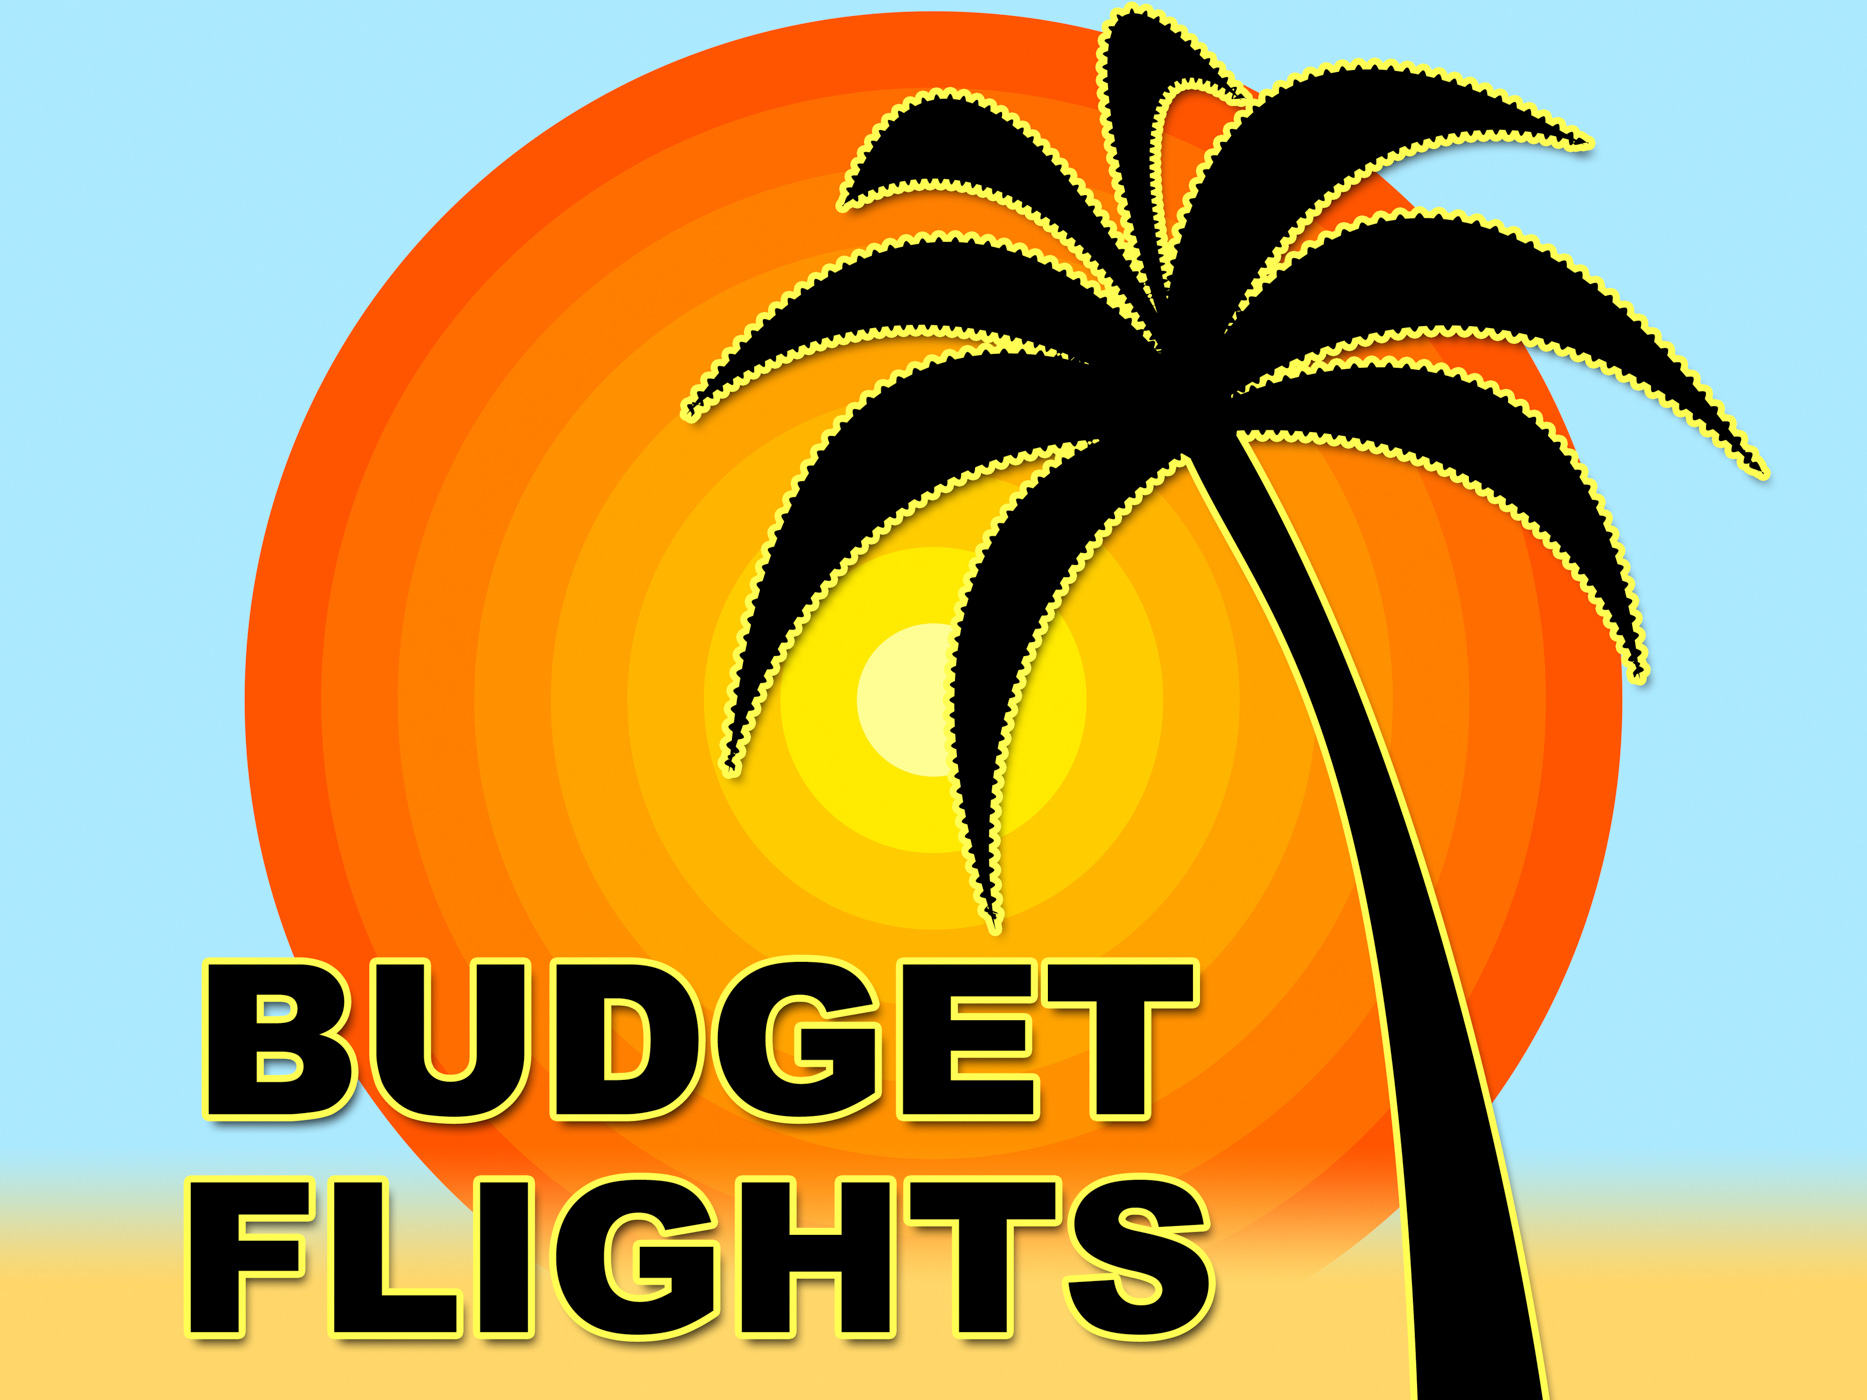 Budget Flights Means Special Offer And Aeroplane, Aeroplane, Fly, Specialoffer, Sale, HQ Photo